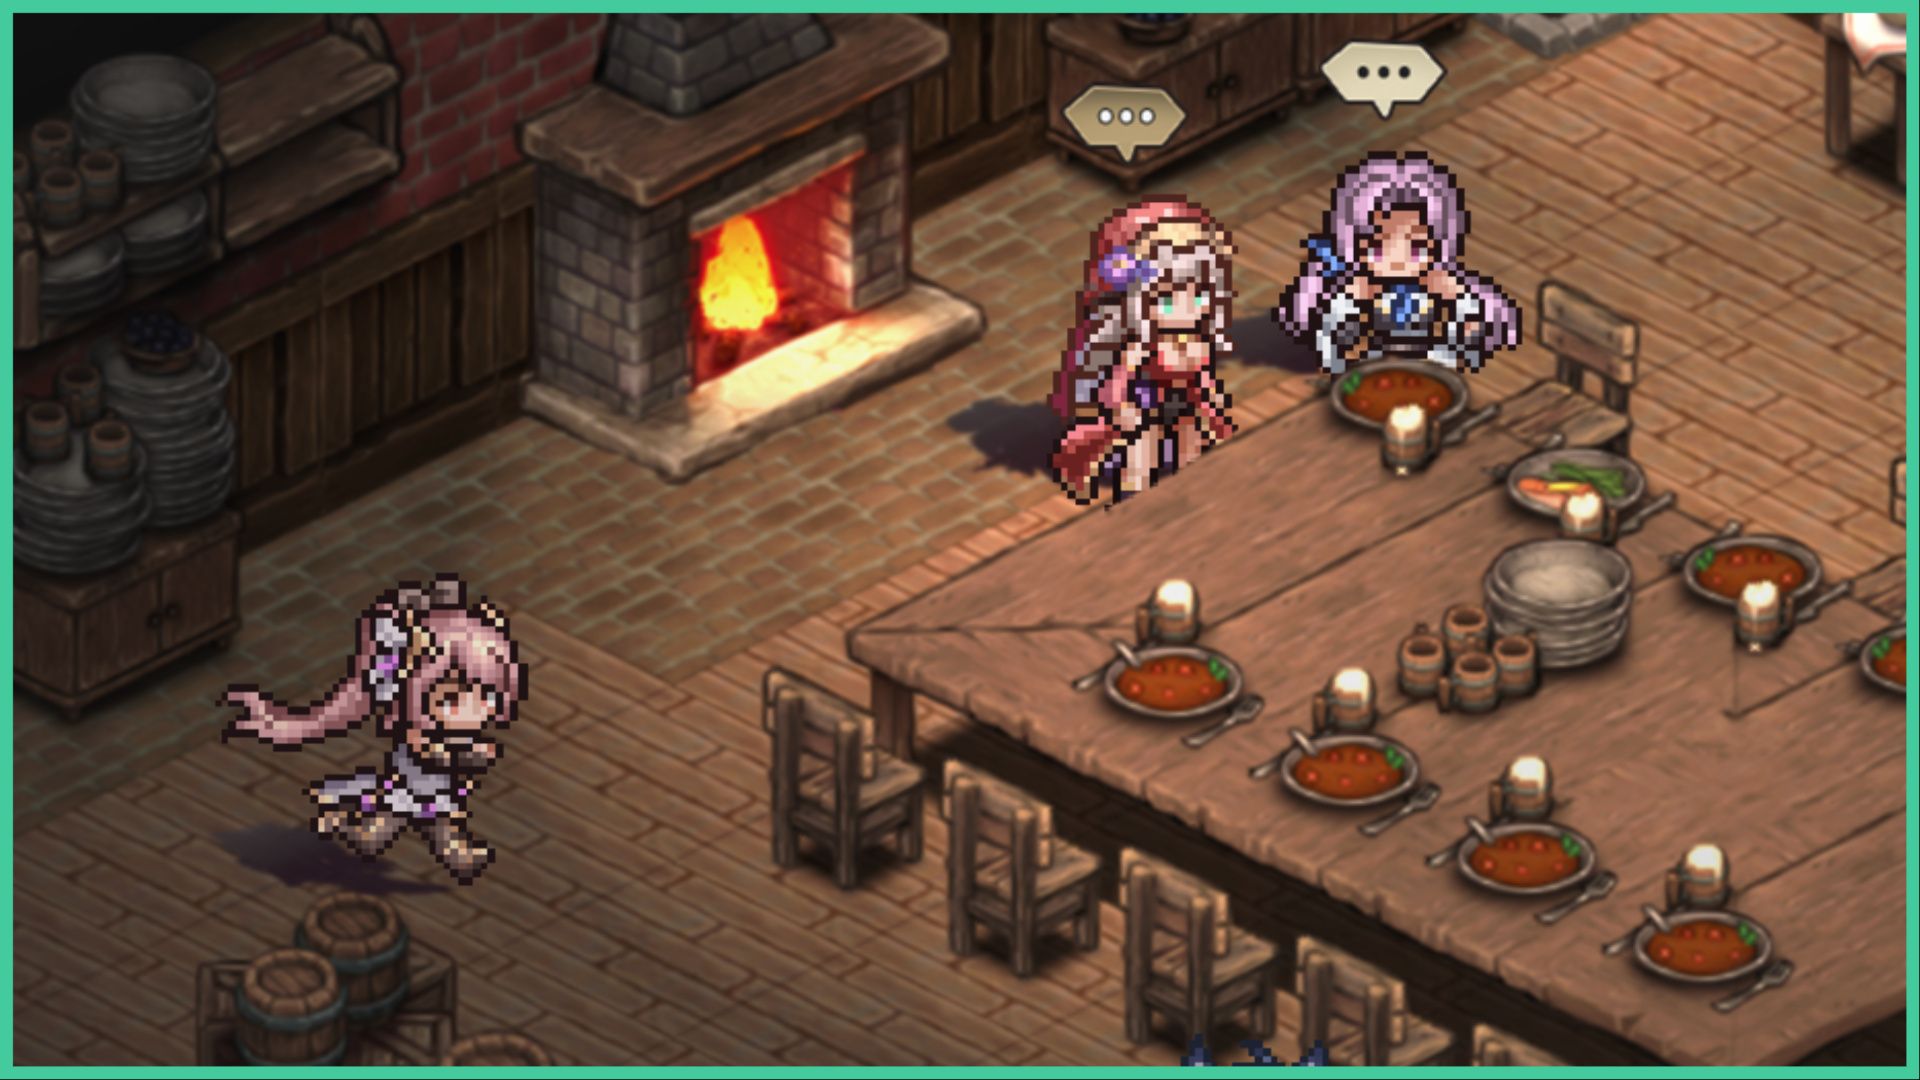 feature image for our endless grades pixel saga codes, the image features pixelated chibi characters relaxing around a large table with bowls of soup and pints of beer, there is a roaring fireplace behind them as another pixel character runs toward the table